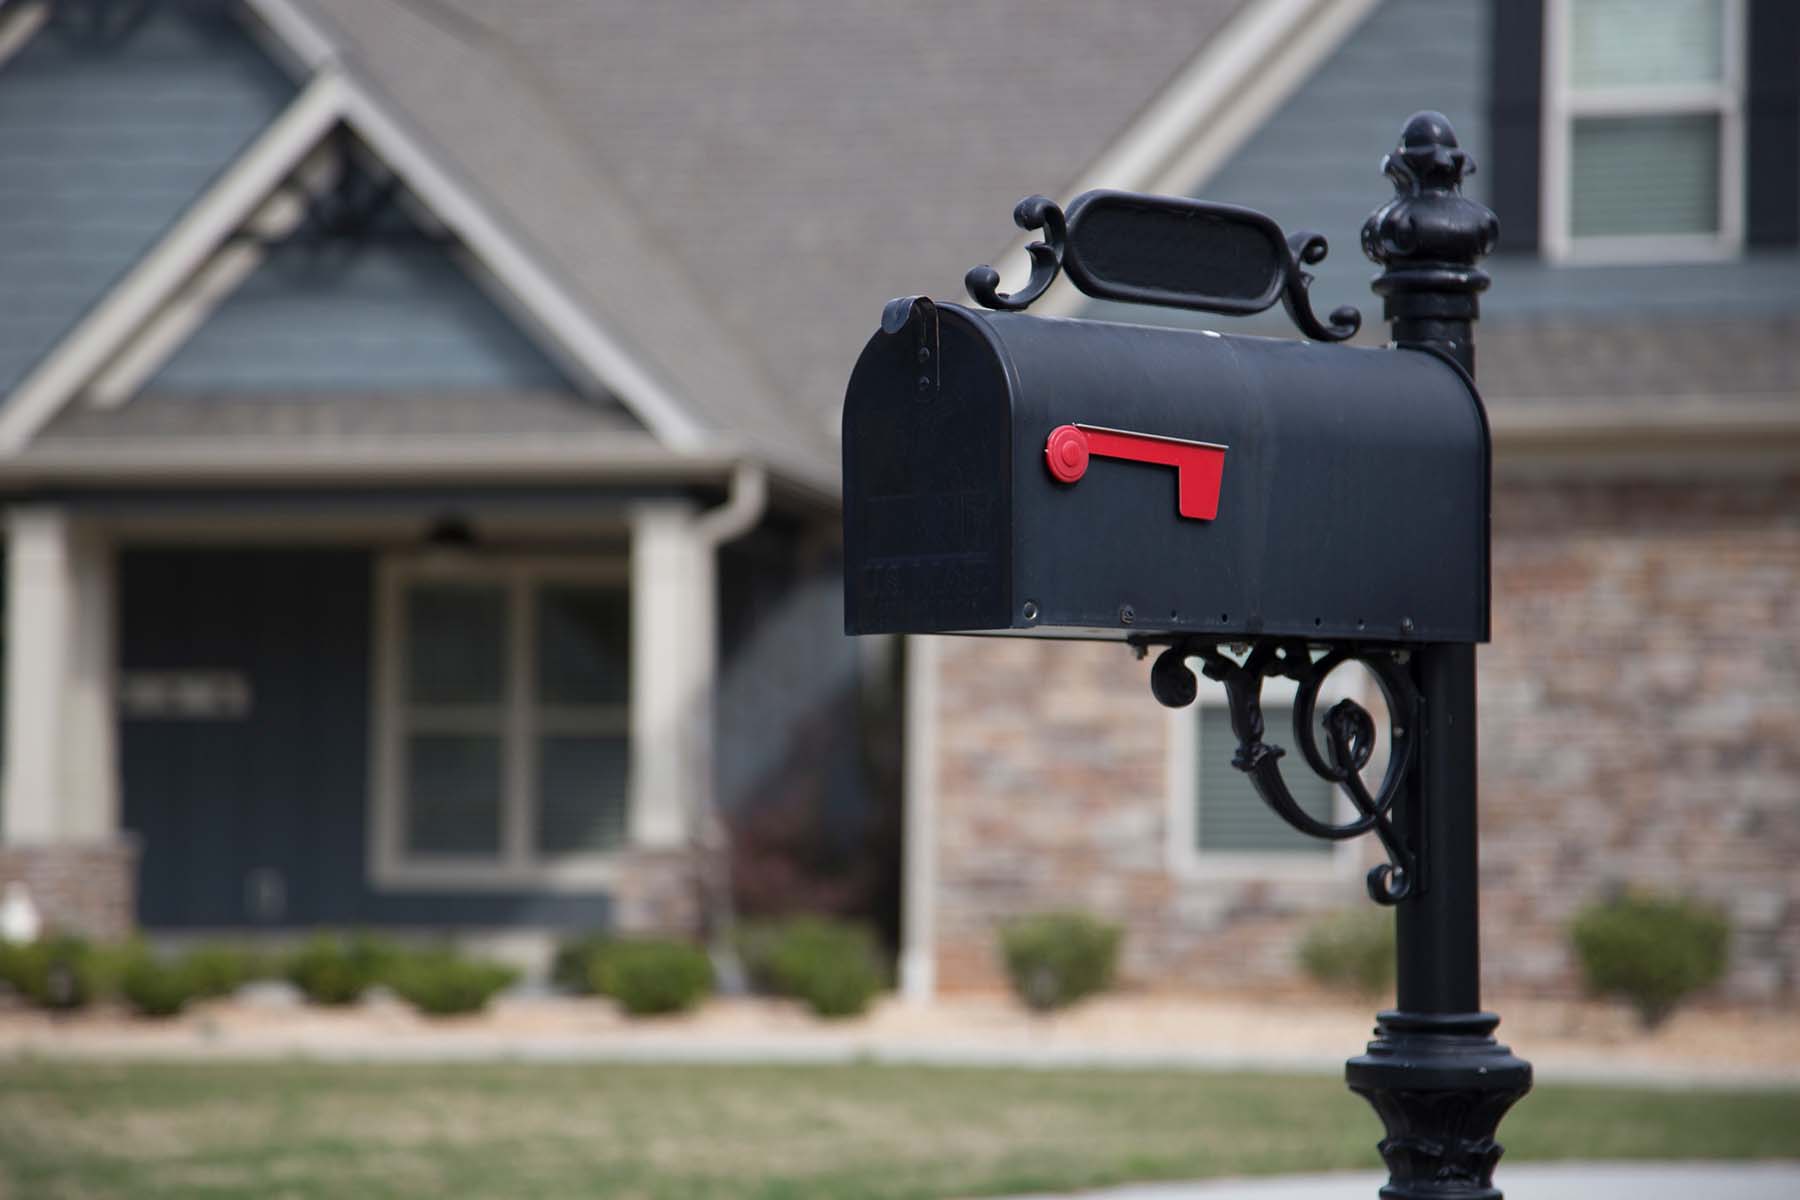 How to Install a Mailbox Post in Concrete: A Complete Step-by-Step Guide with Quikrete